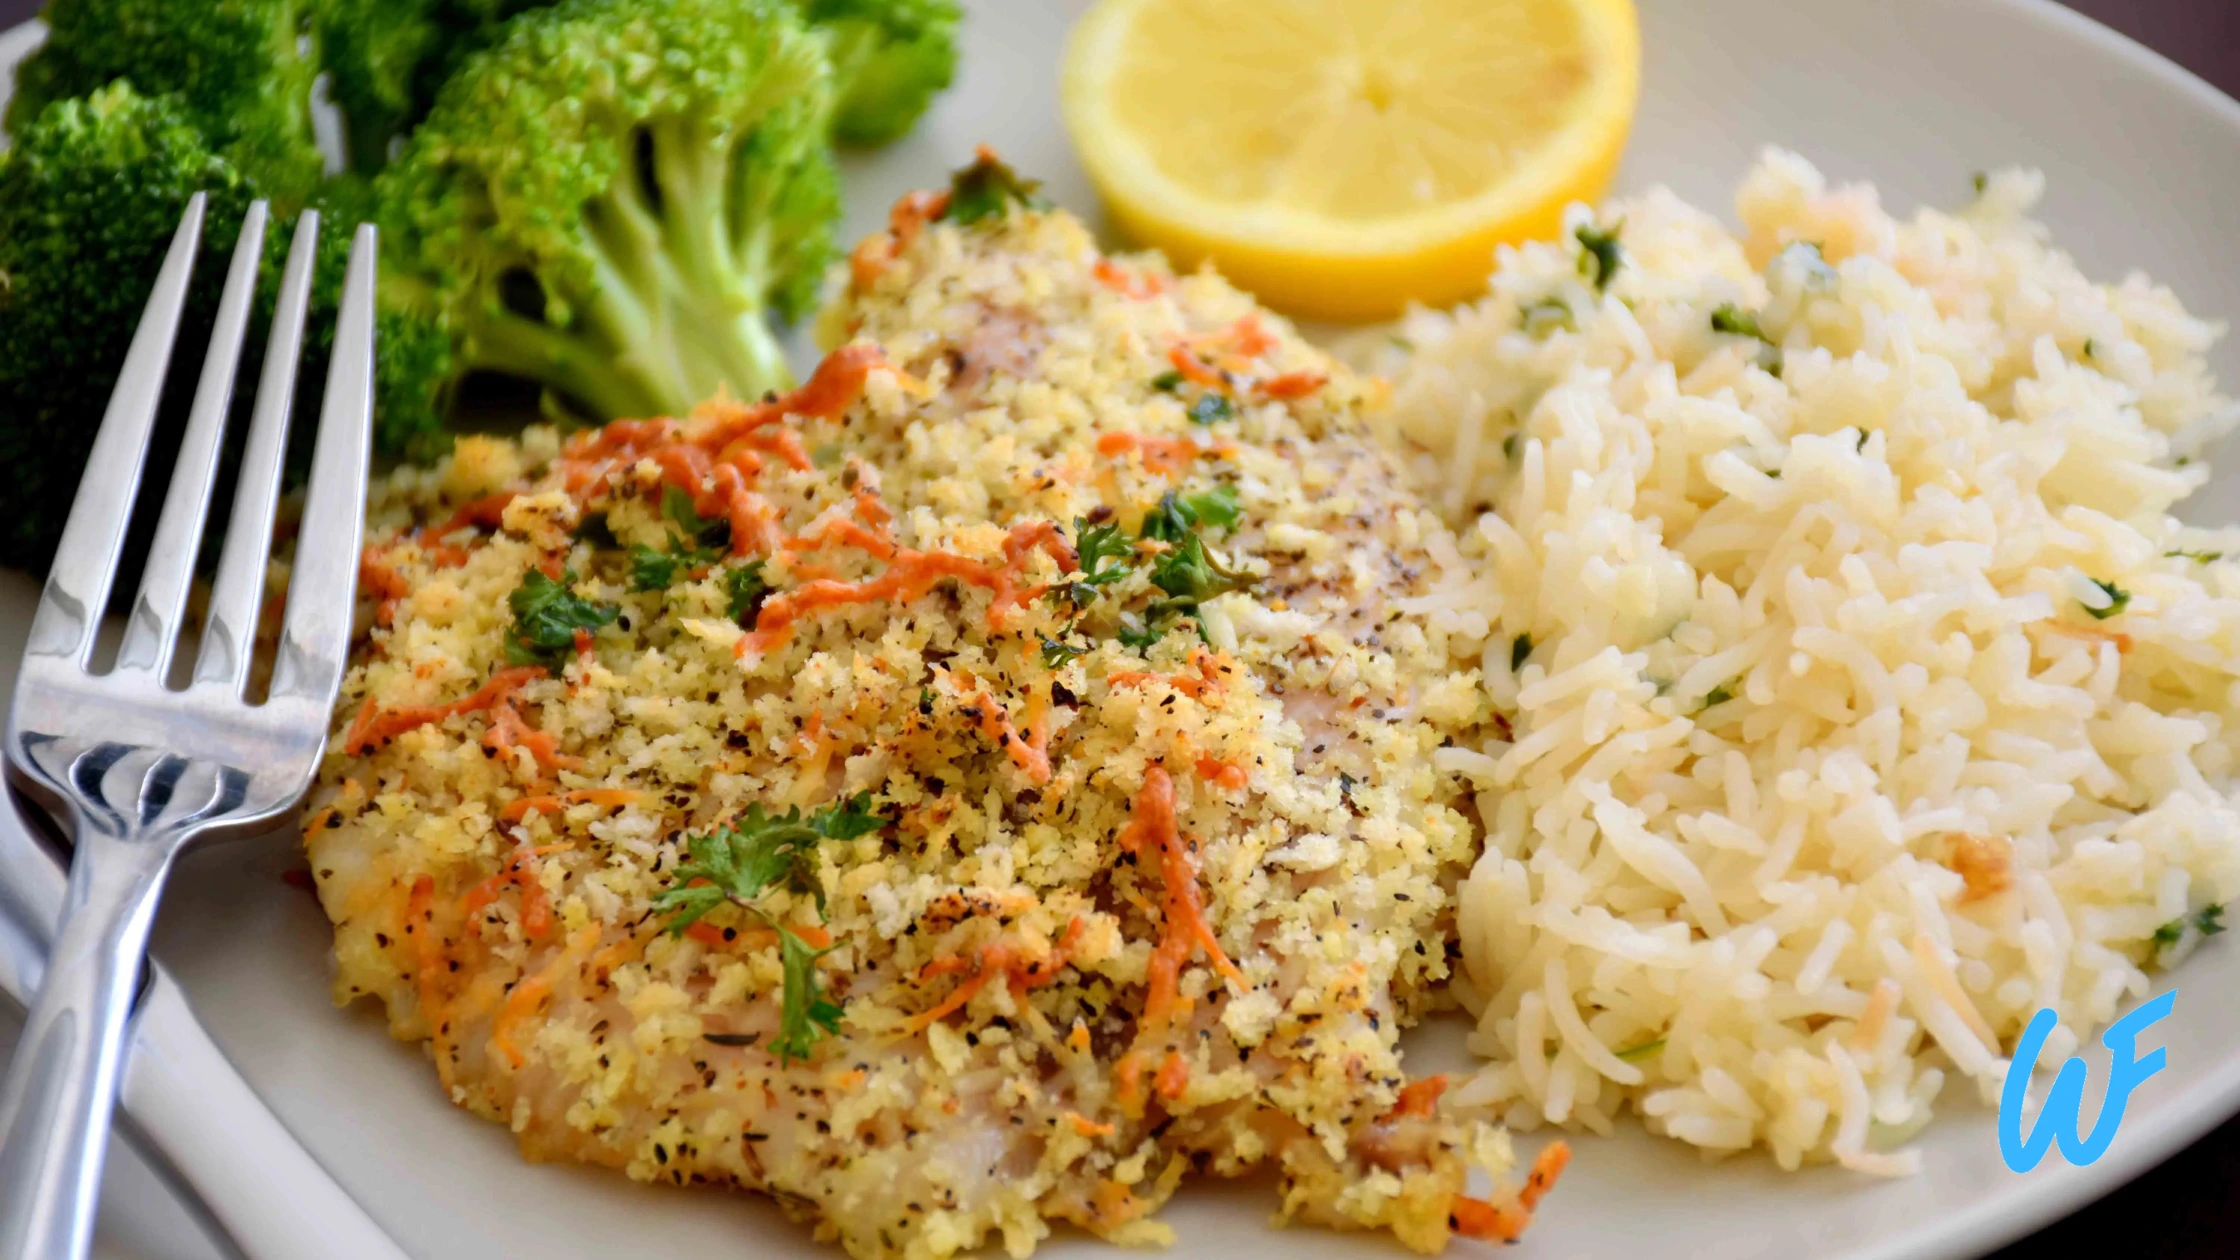 You are currently viewing BAKED HERB CRUSTED TILAPIA WITH ROASTED VEGETABLES